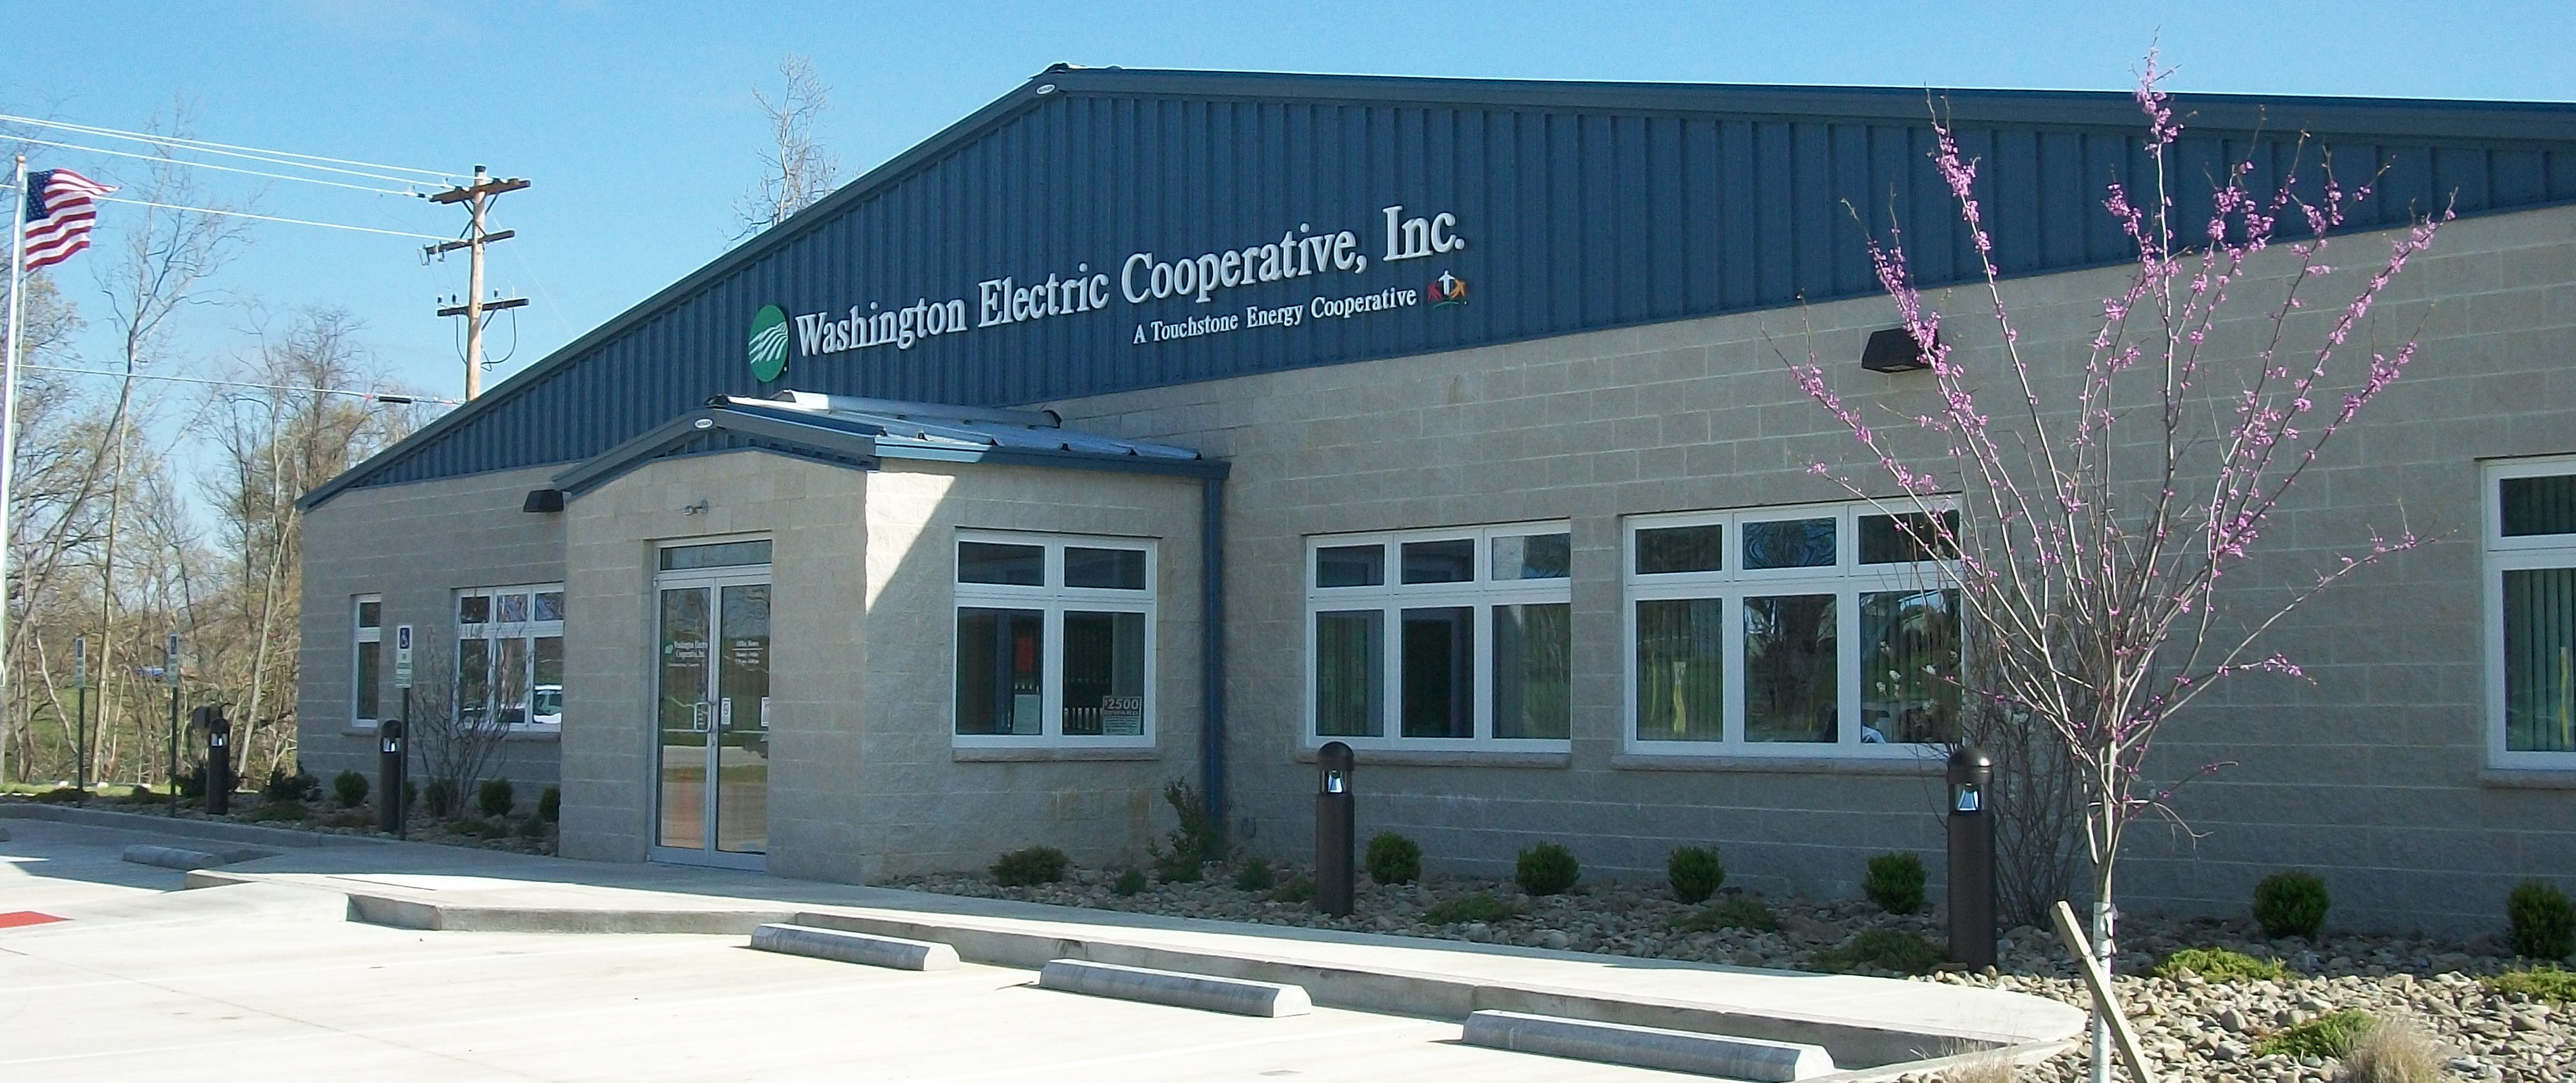 Picture of Washington Electric Cooperative's office building on a sunny spring day